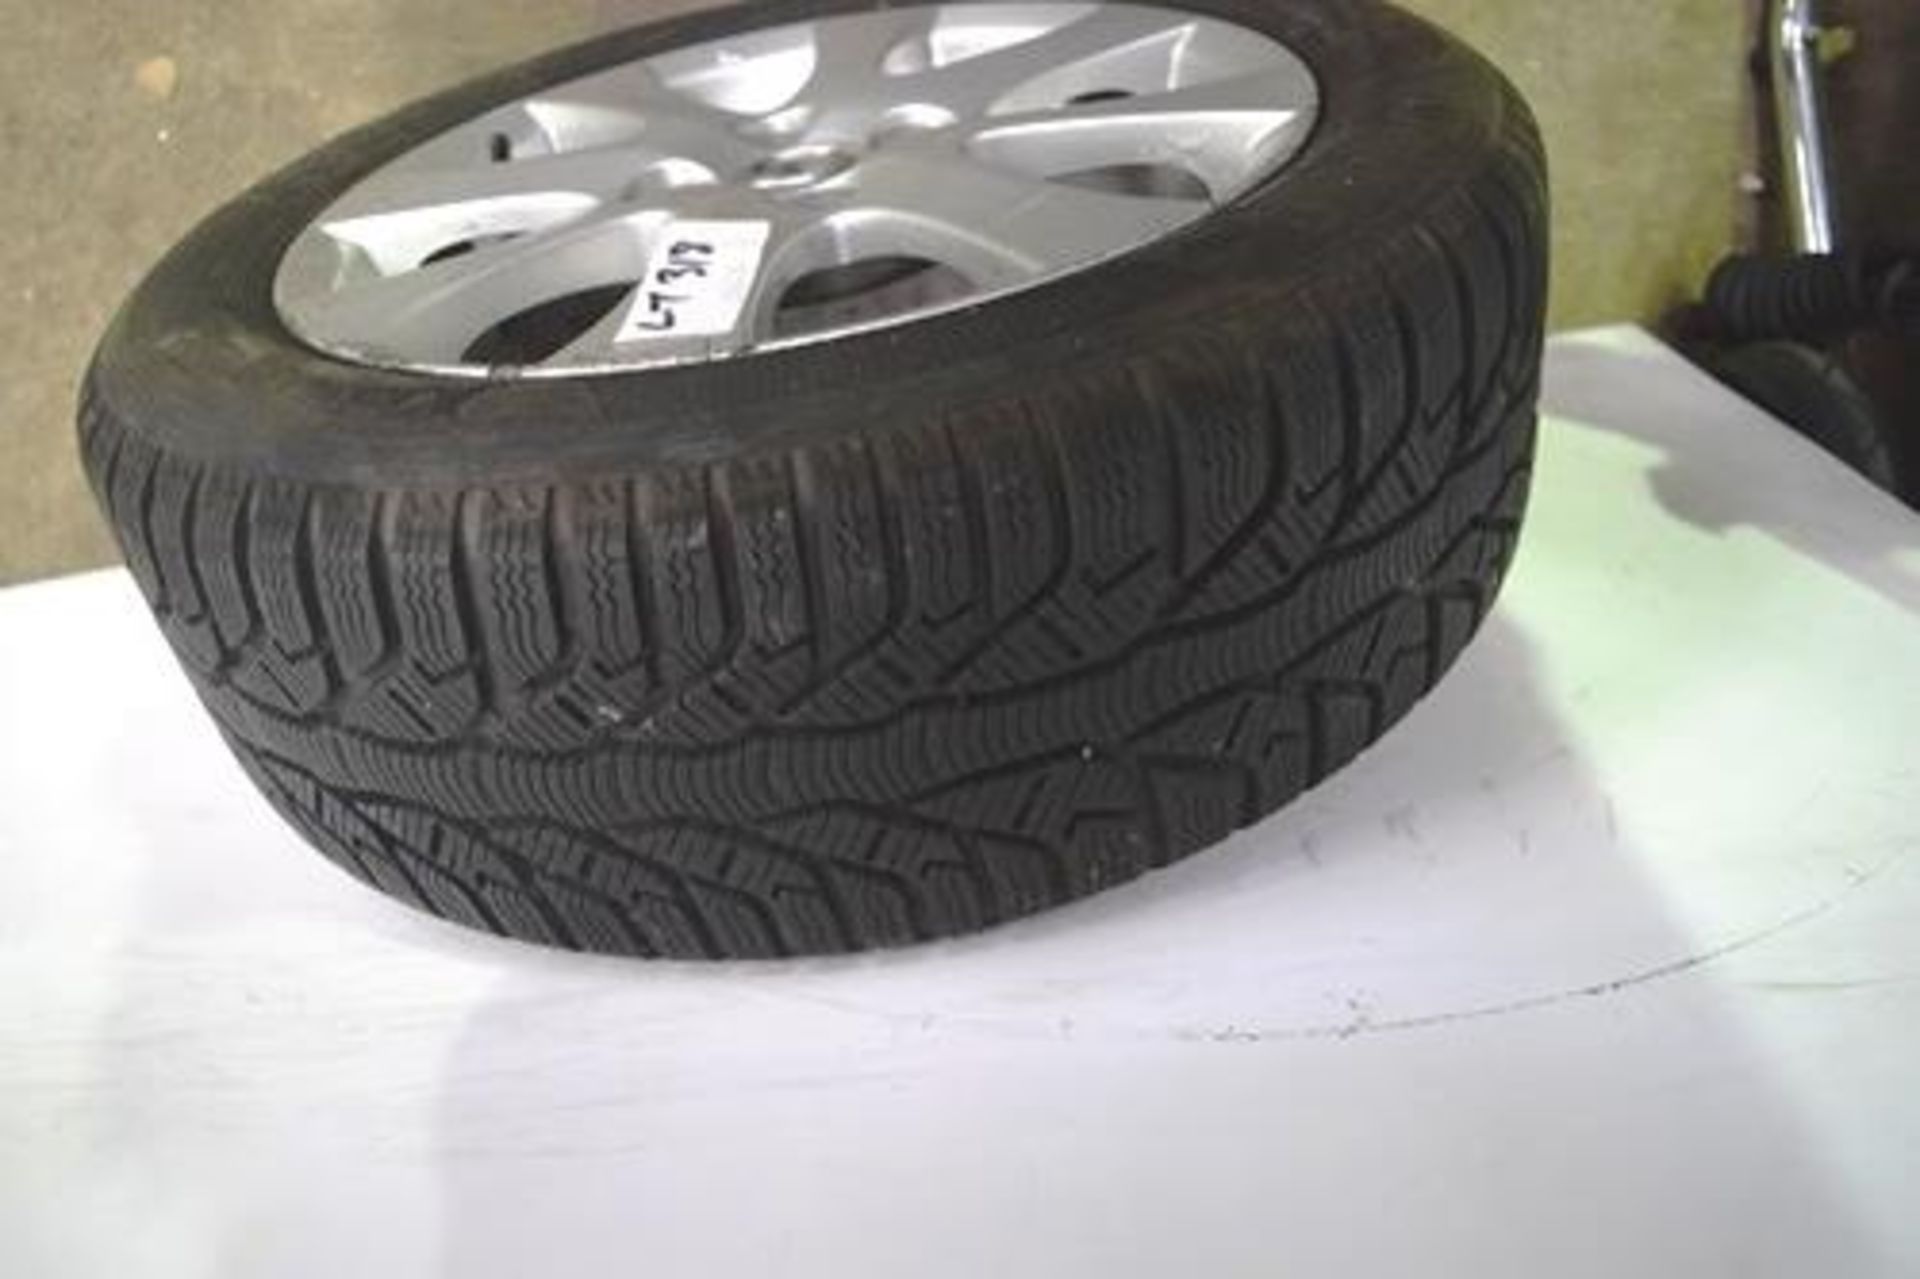 1 x Mazda 4 stud alloy wheel and 1 x Fiat 4 stud alloy wheel, both with fitted tyres - Second- - Image 5 of 6